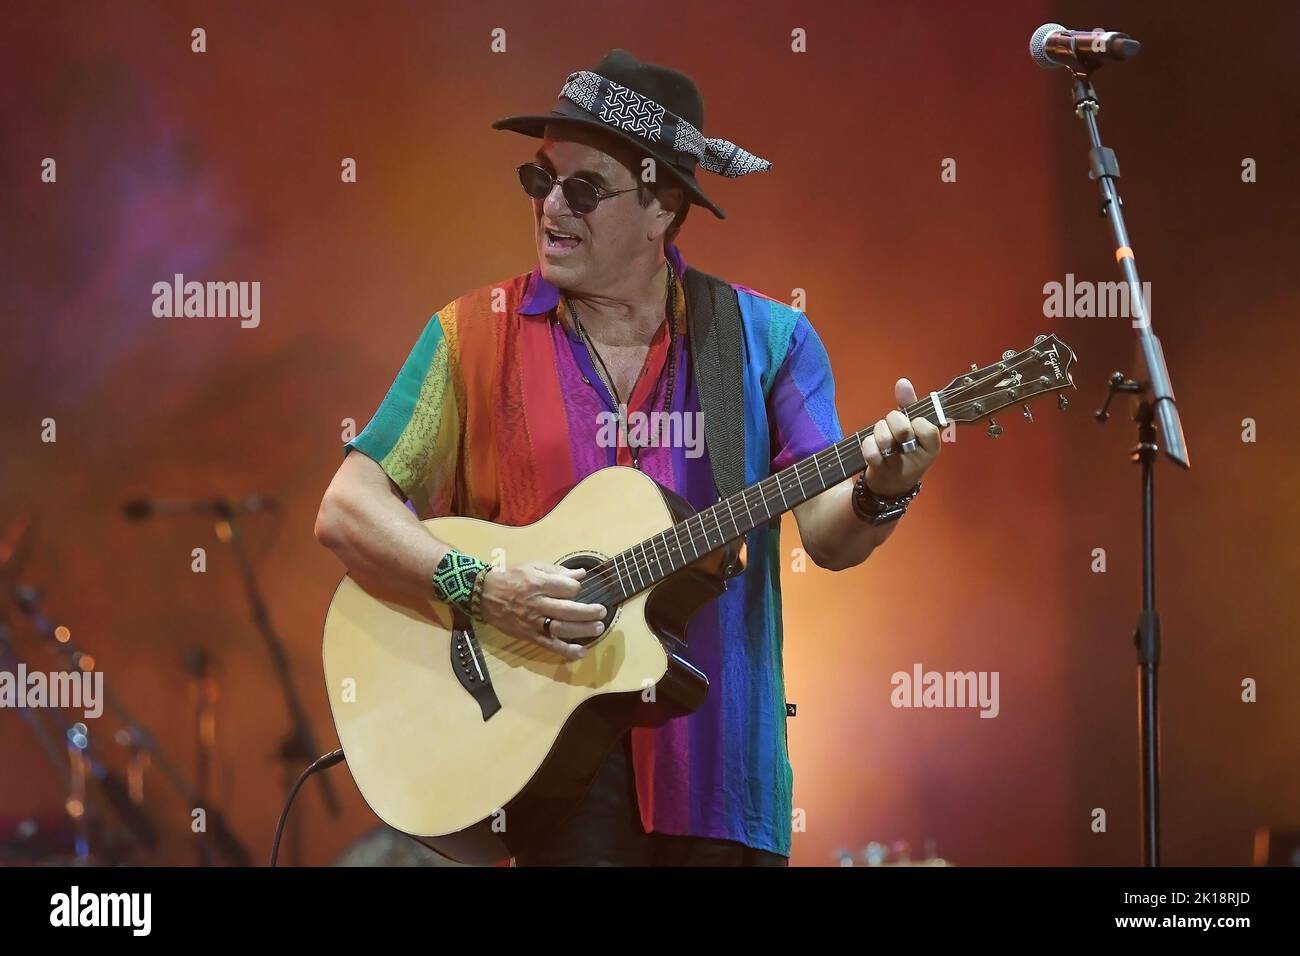 Rio de Janeiro, Brazil,September 9, 2022. Singer and violinist Evandro Mesquita of the band Blitz, during a concert at Rock in Rio 2022 in the city of Stock Photo